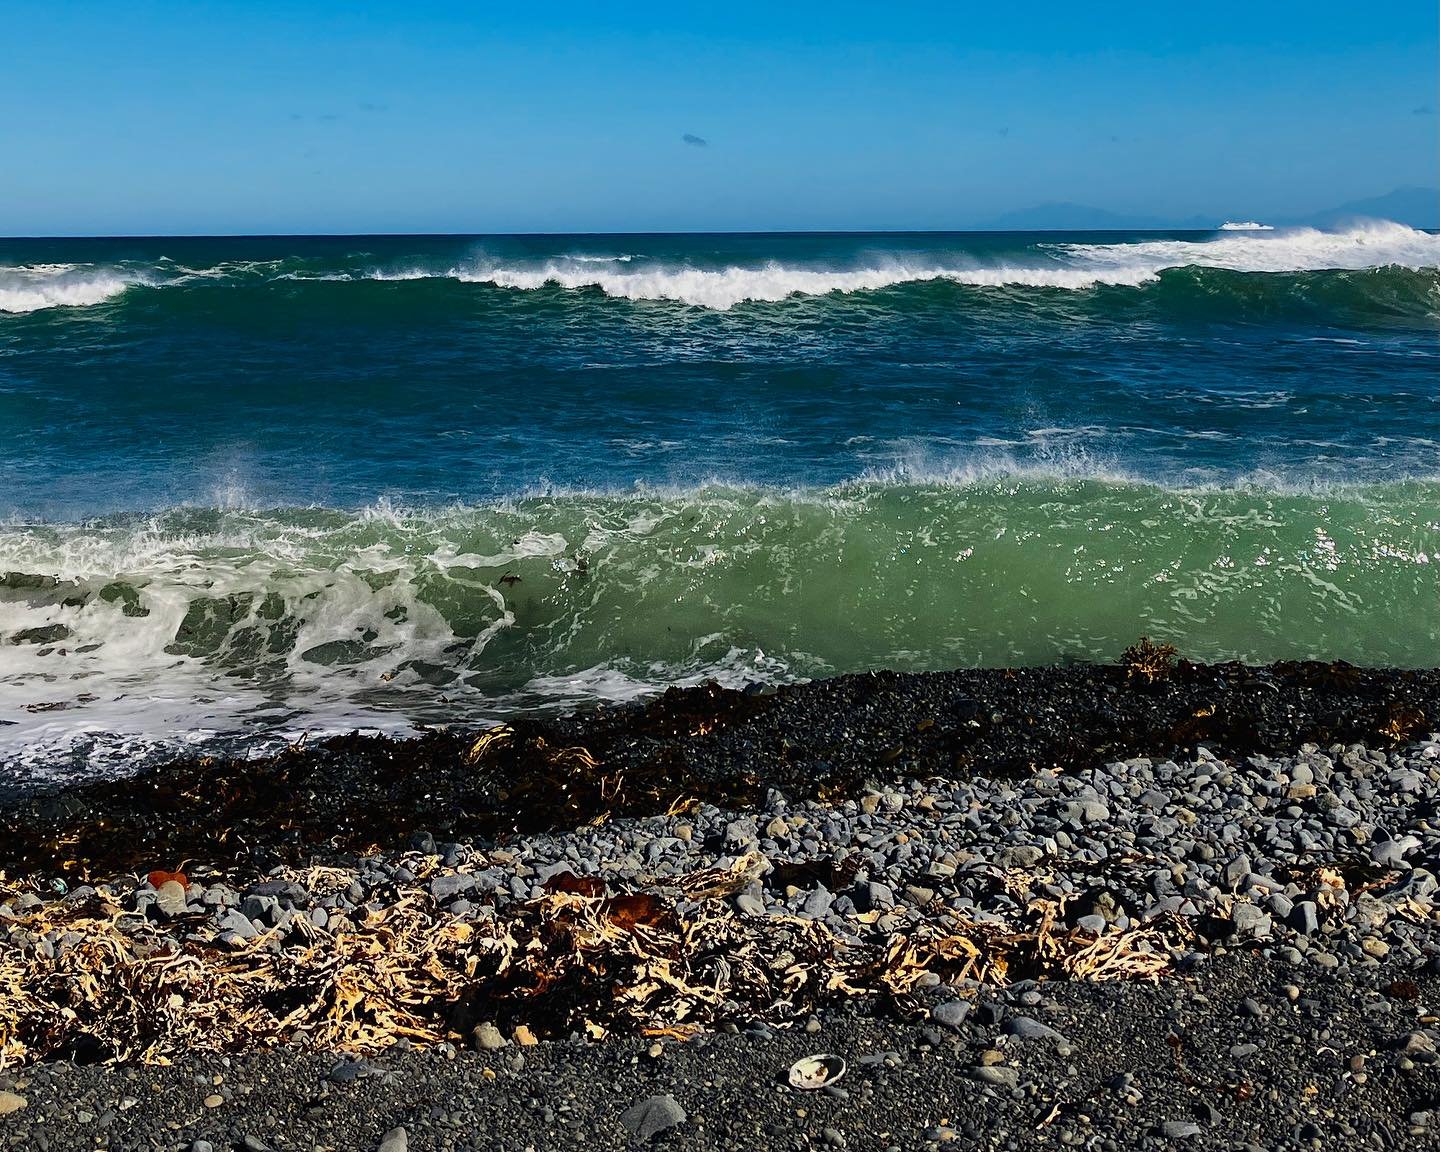 Huge swell at Ōwhiro Bay this morning looking toward Red Rocks. Everything sparkled, the wind was cold, the sea surging up onto the rocky beach. Exhilerating. I think these photos capture a little bit of the atmosphere. 

#beachphotography #coastalph